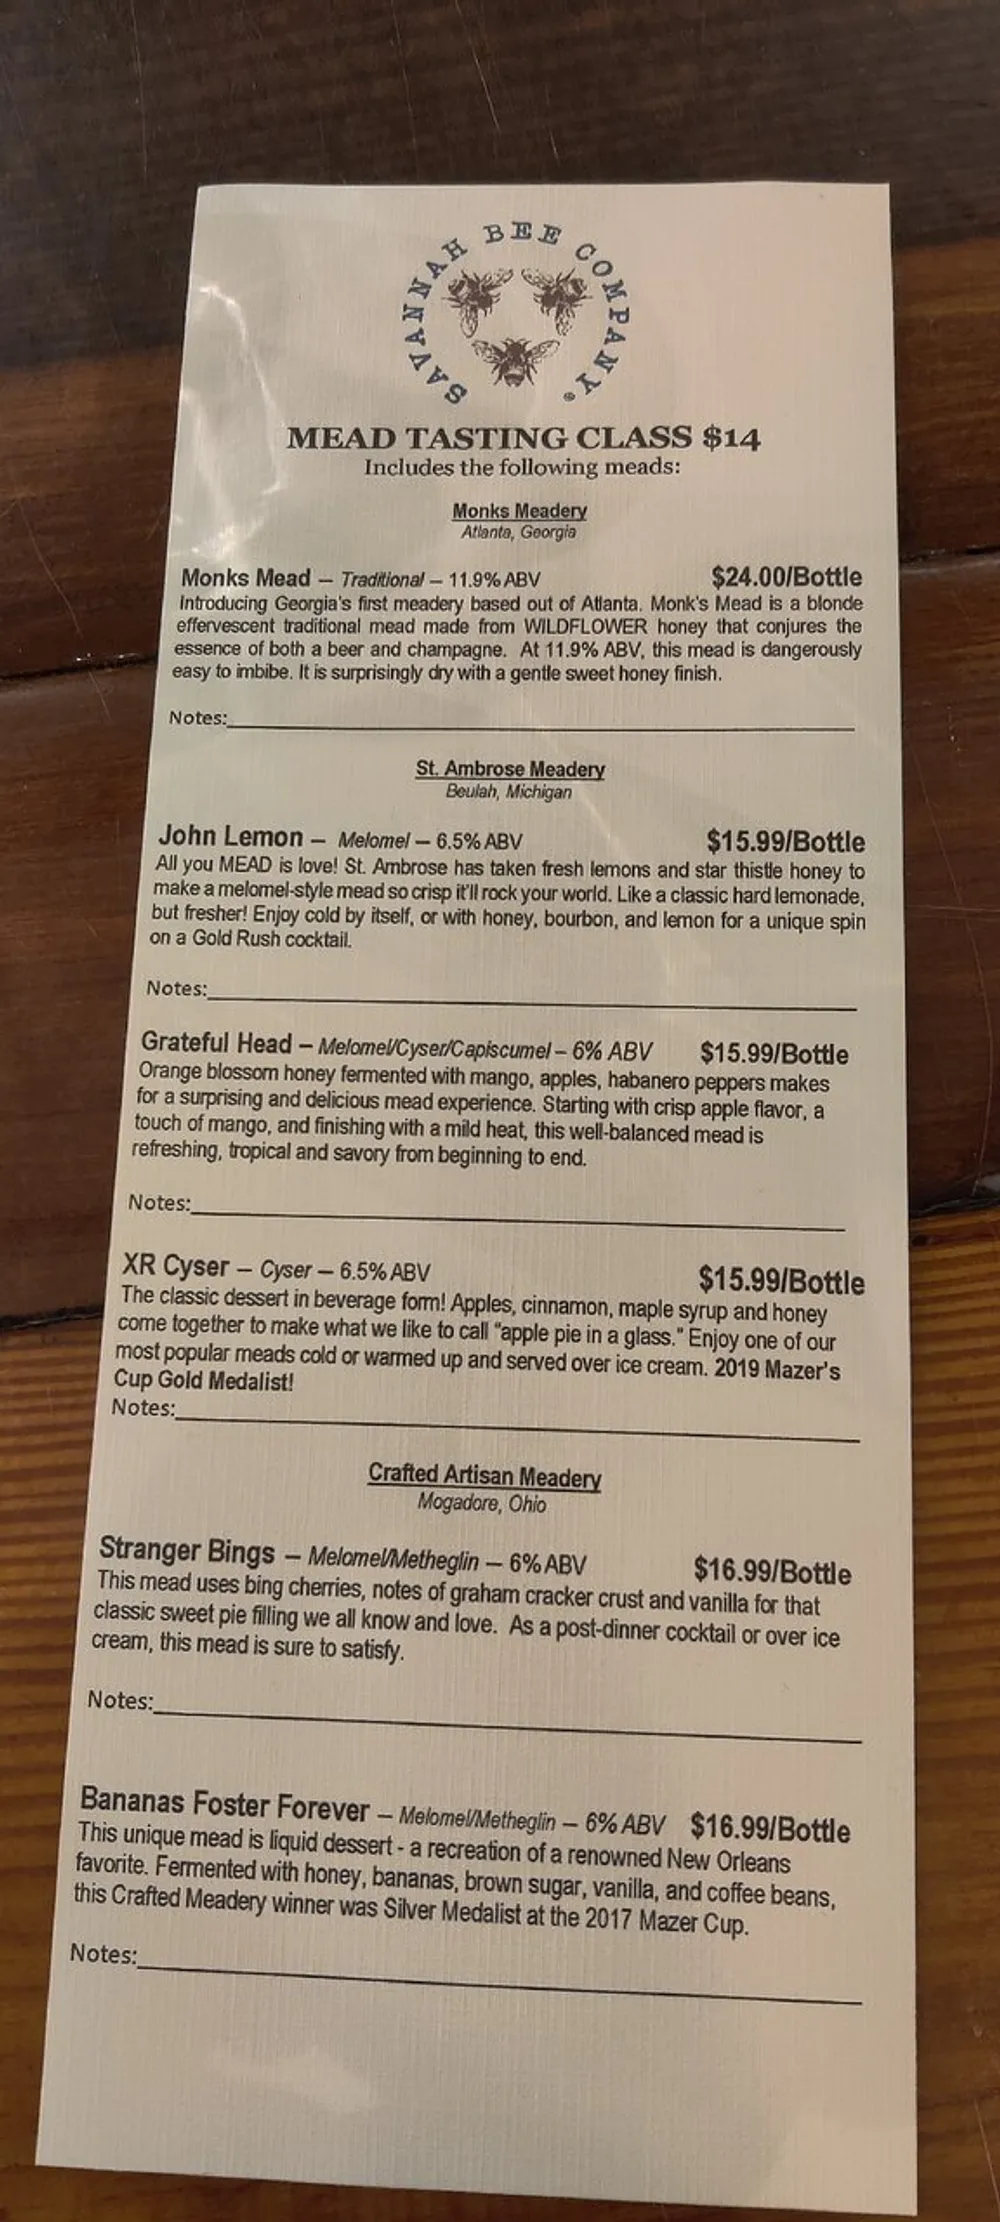 The image shows a menu for a mead tasting class listing various meads with descriptions alcohol content and prices per bottle from different meaderies